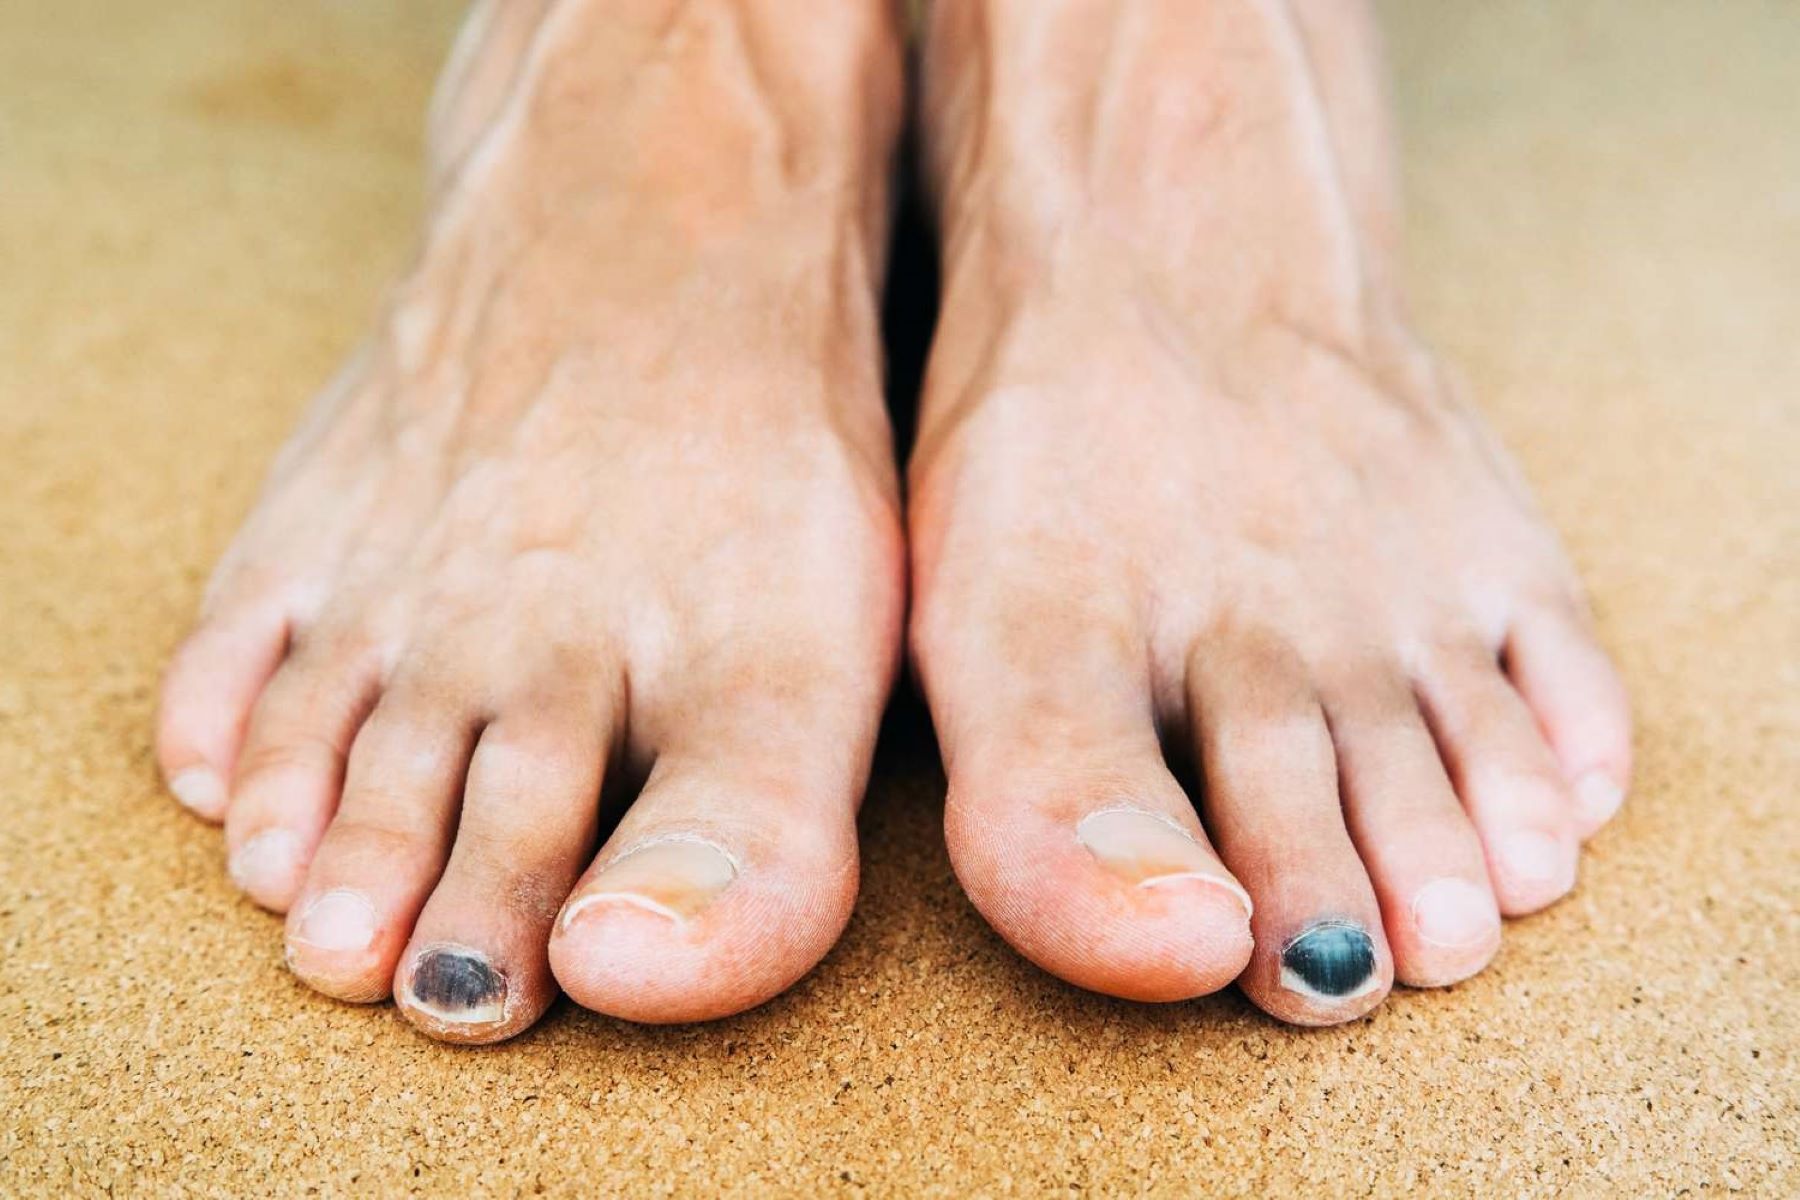 Treating Bruised Toenails: What's The Most Effective Method?